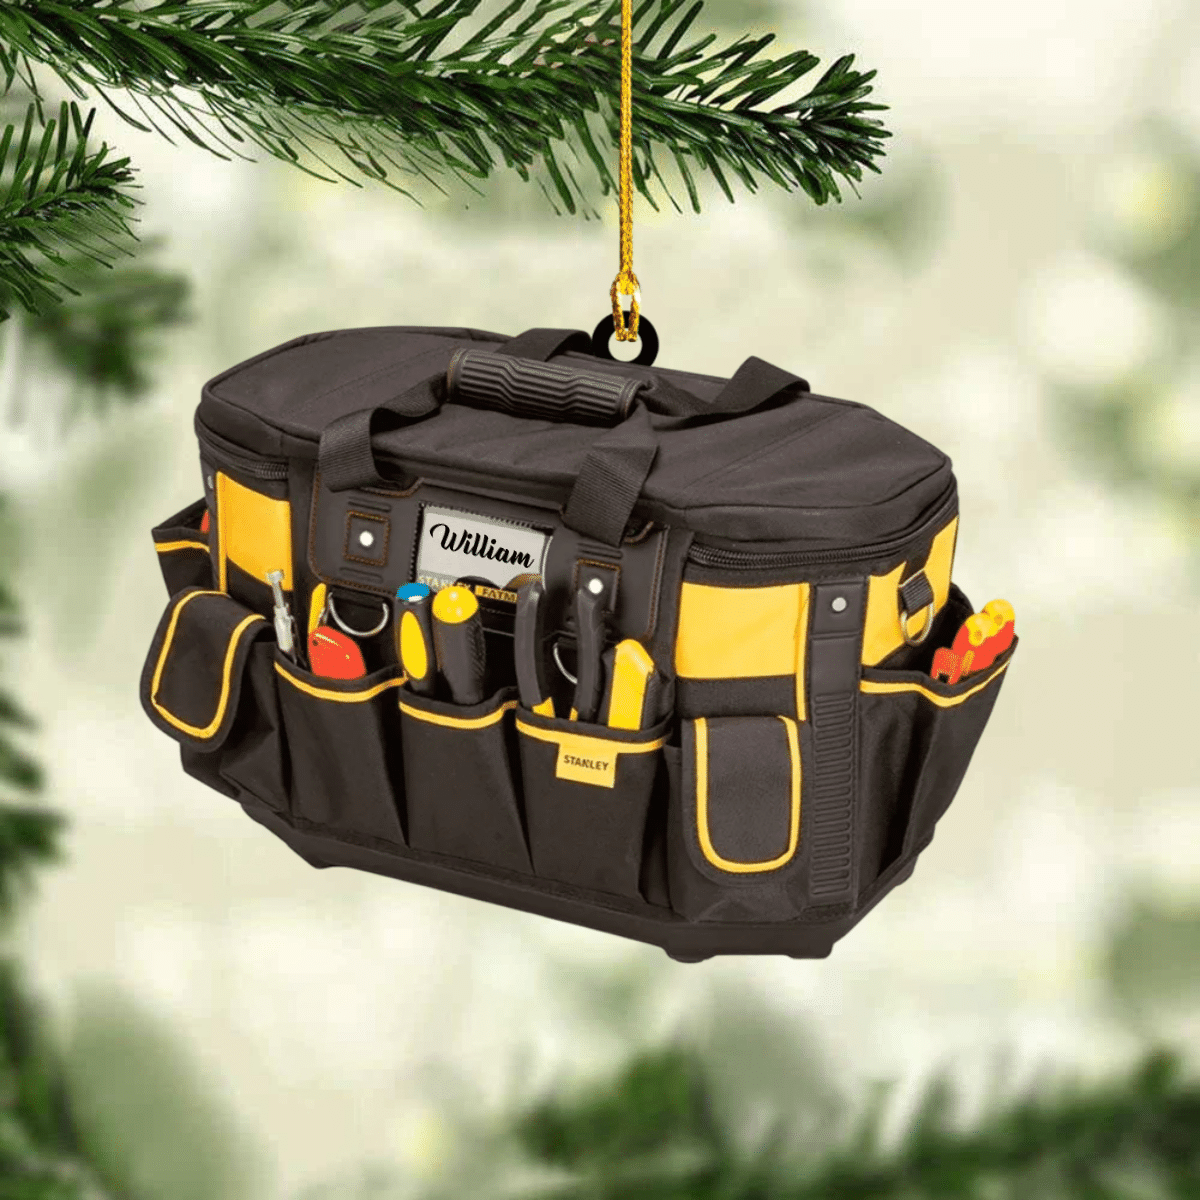 Personalized Plumber Tool Bag Acrylic Ornament/ Christmas Tree Decor For Plumbers